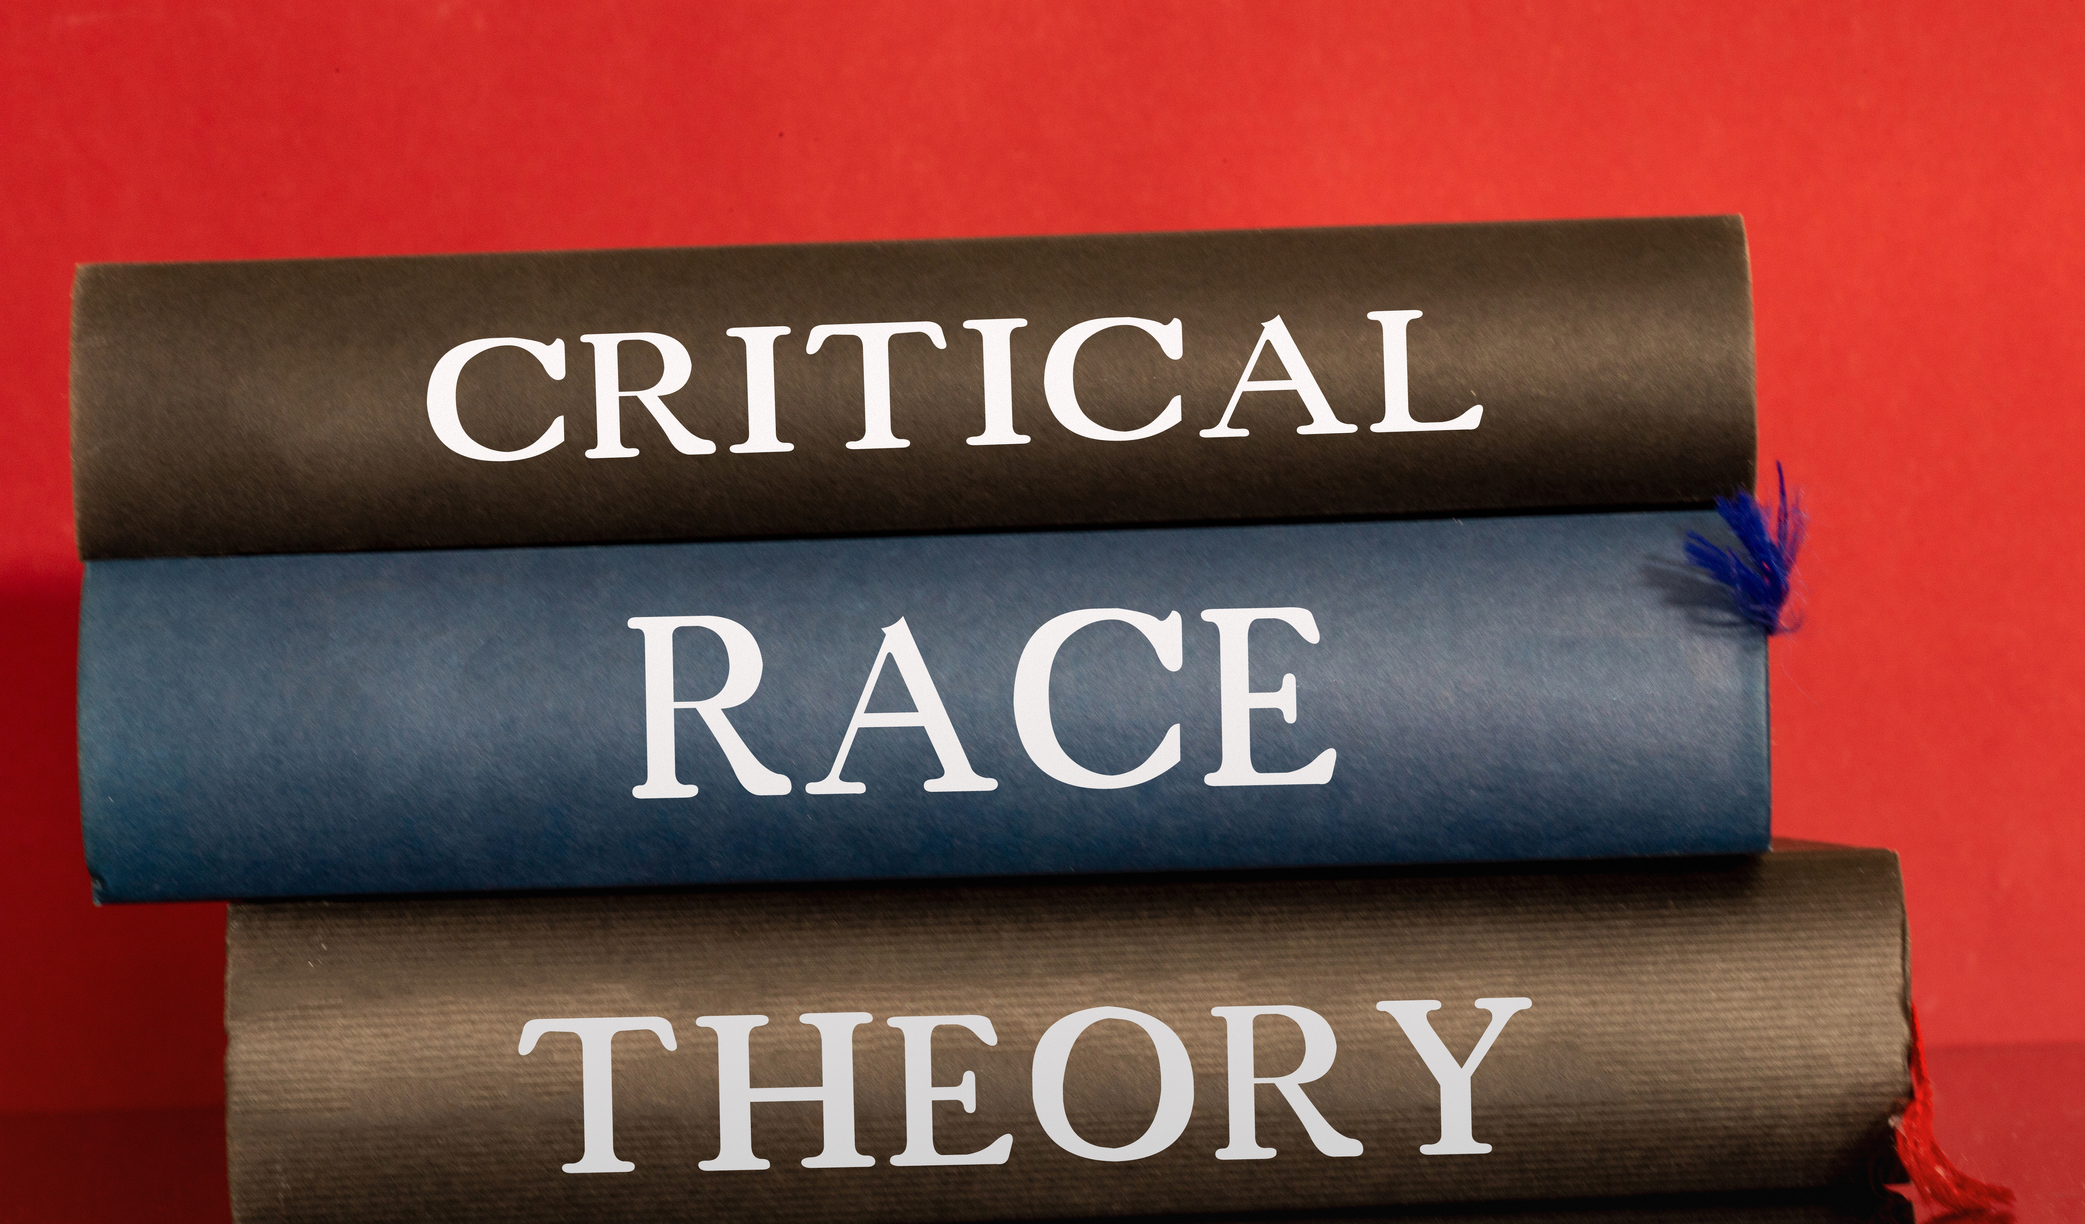 Proponents Of Critical Race Theory Need Not Apply At This Christian College